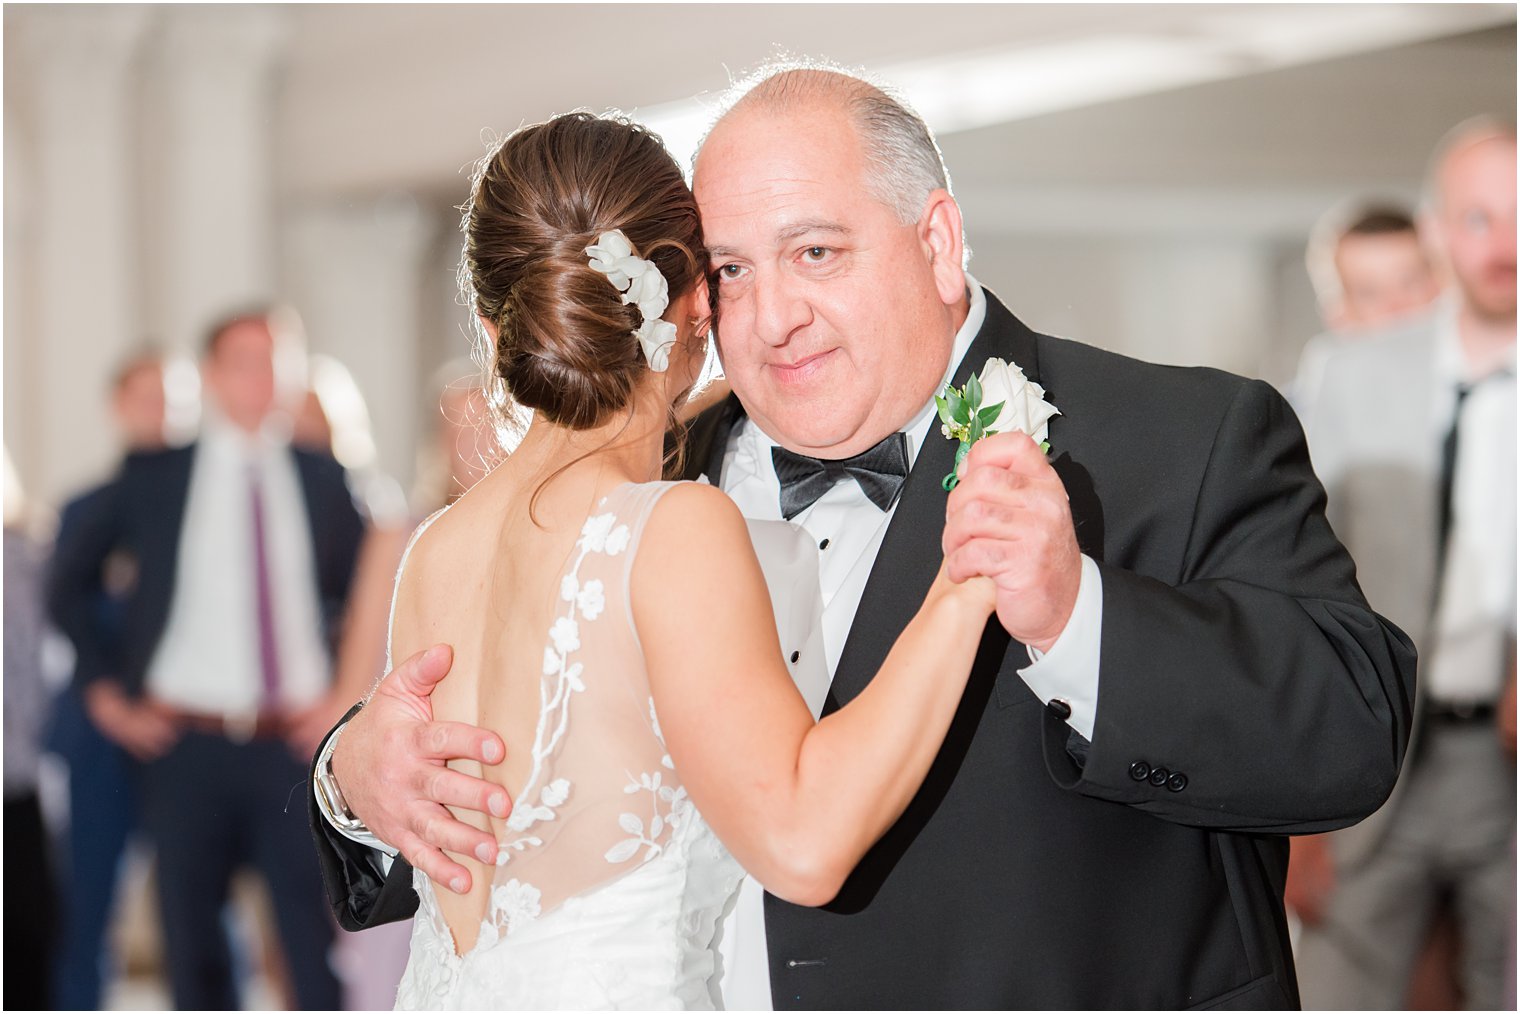 bride dances with dad during wedding reception in New Jersey